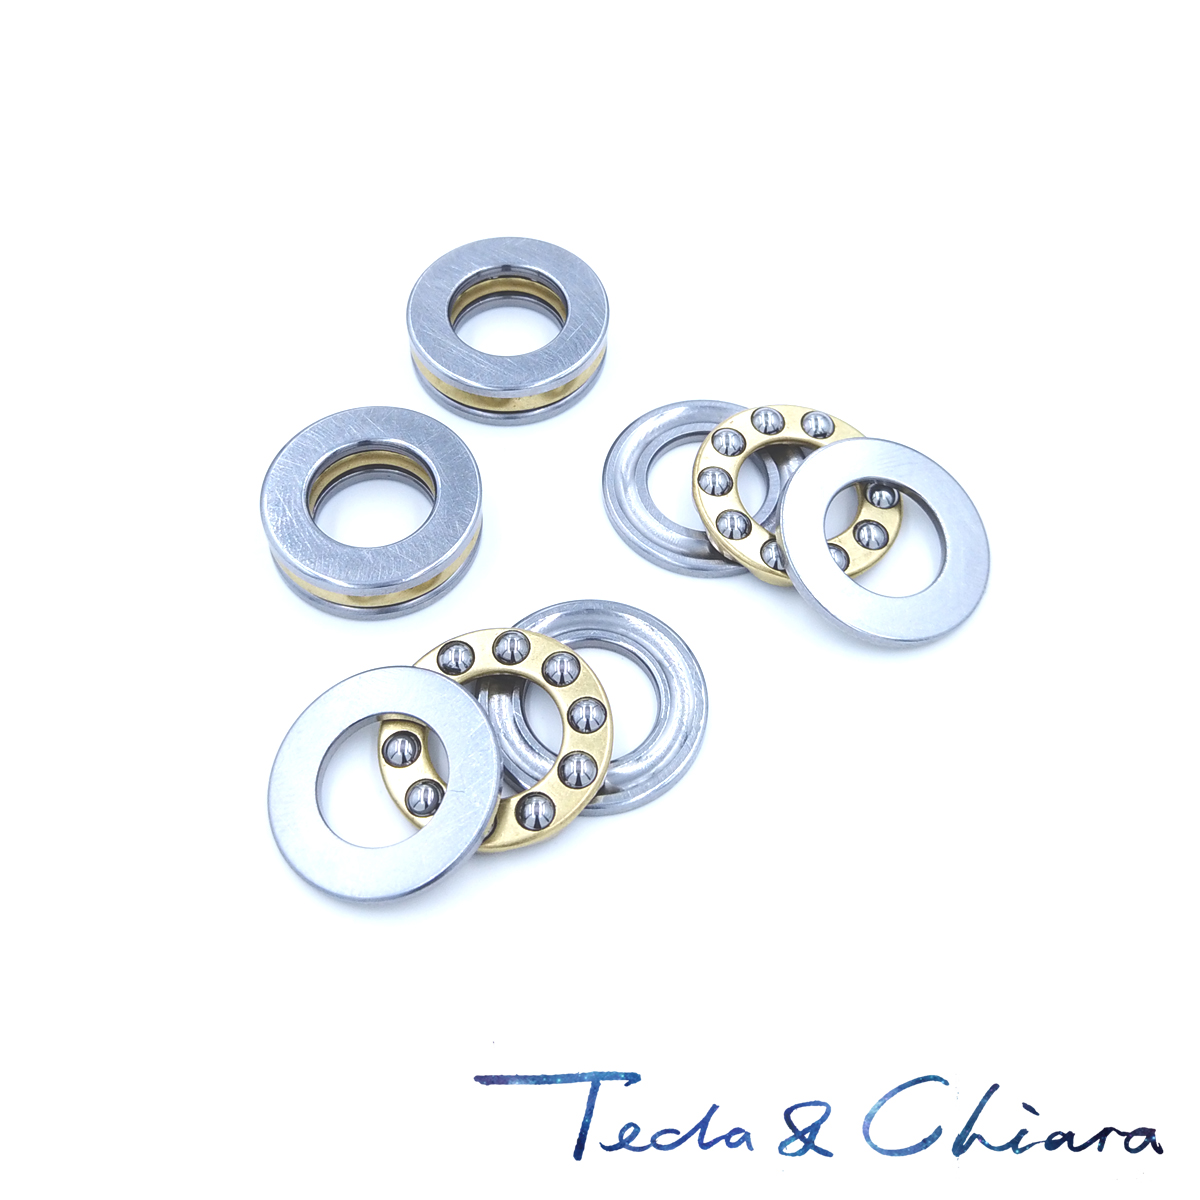 1Pc / 1Piece F4-9M 4 x 9 x 4 mm Axial Ball Thrust Bearing 3-Parts * 3-in-1 Plane High Quality